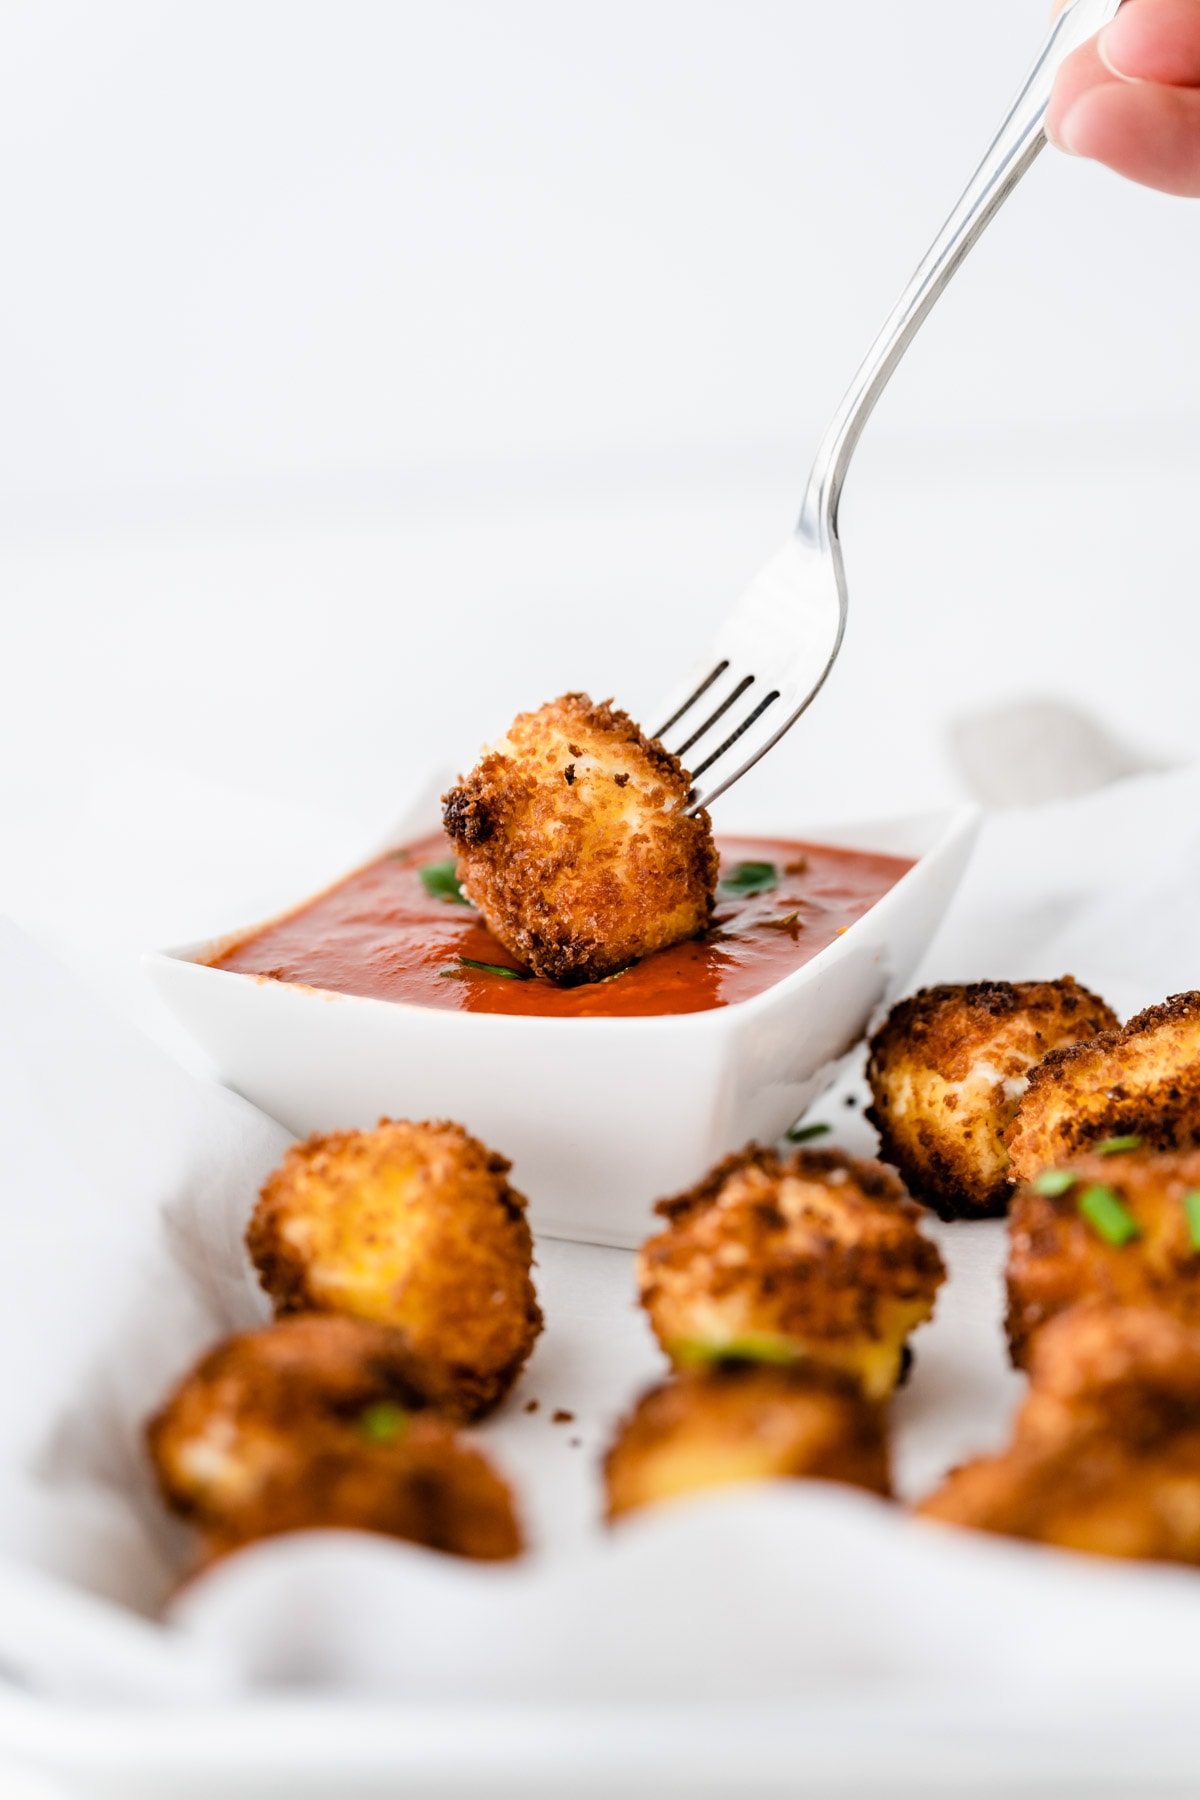 Fried goat cheese being dipped in marinara